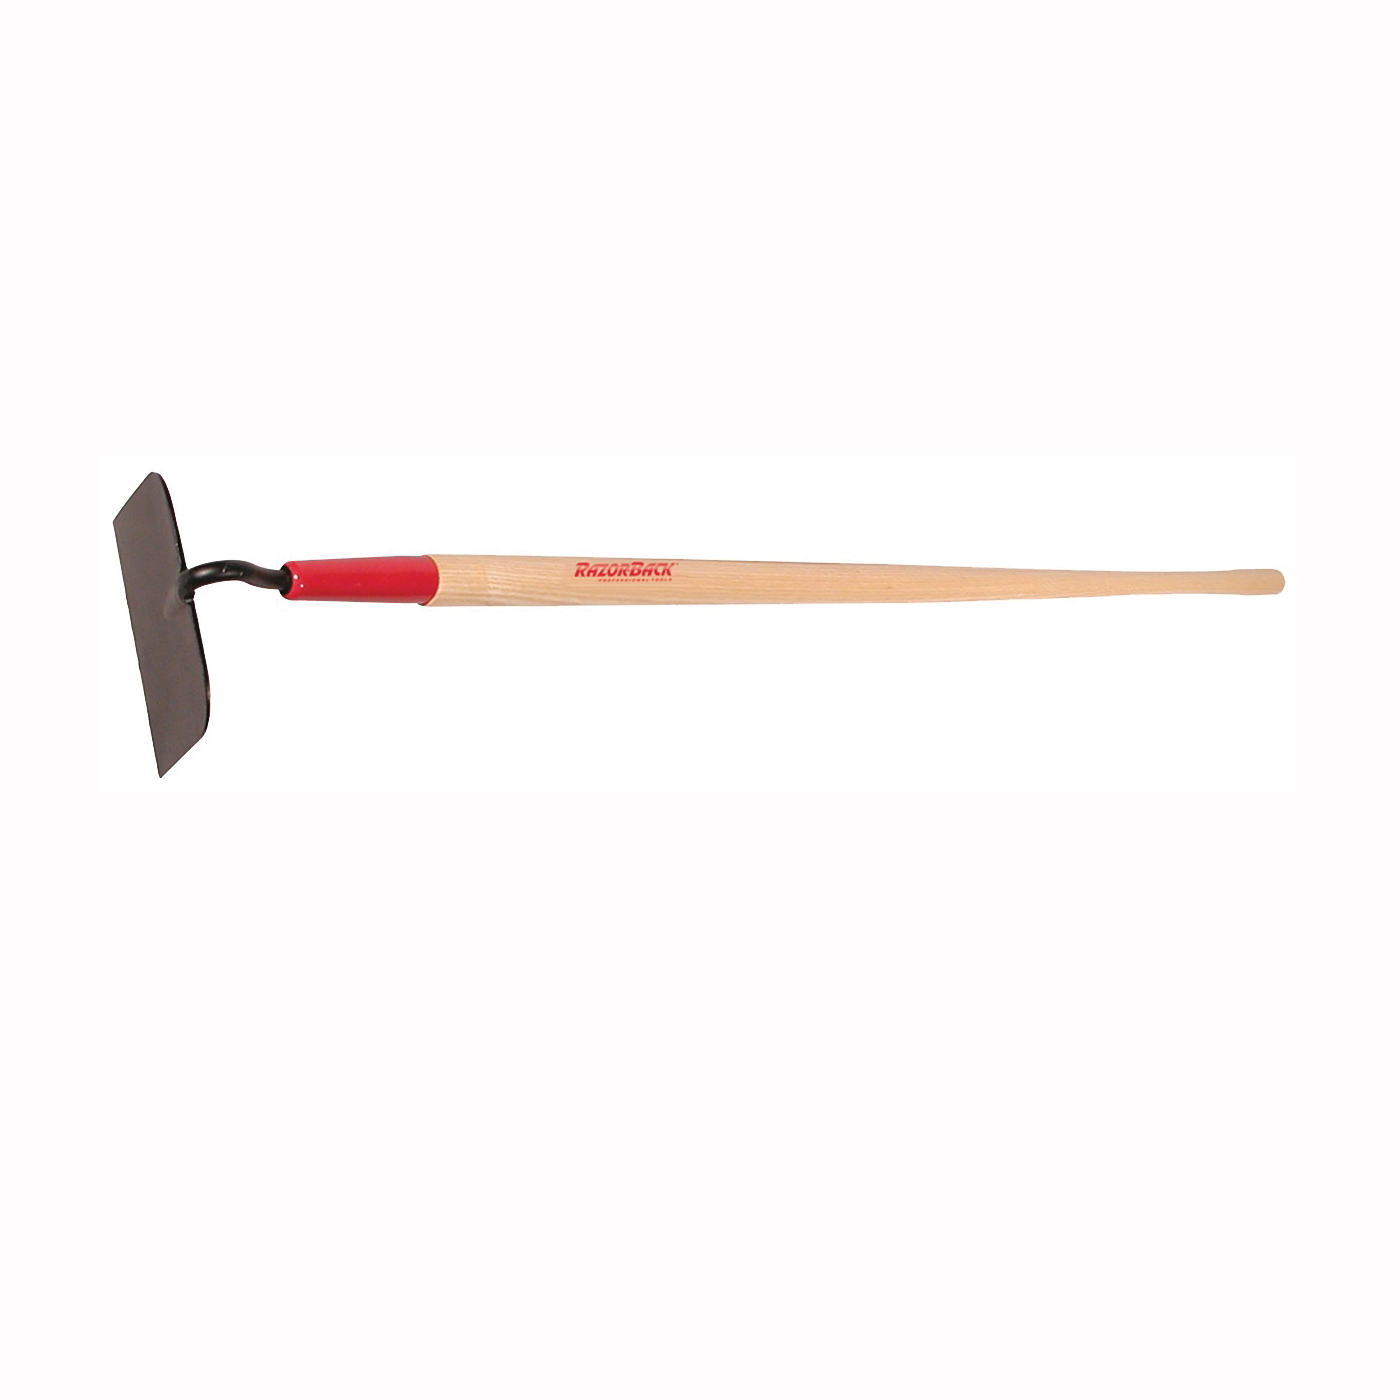 71112 Cotton Hoe with Wood Handle, 7 in W Blade, 5-1/4 in L Blade, Steel Blade, Beveled Blade